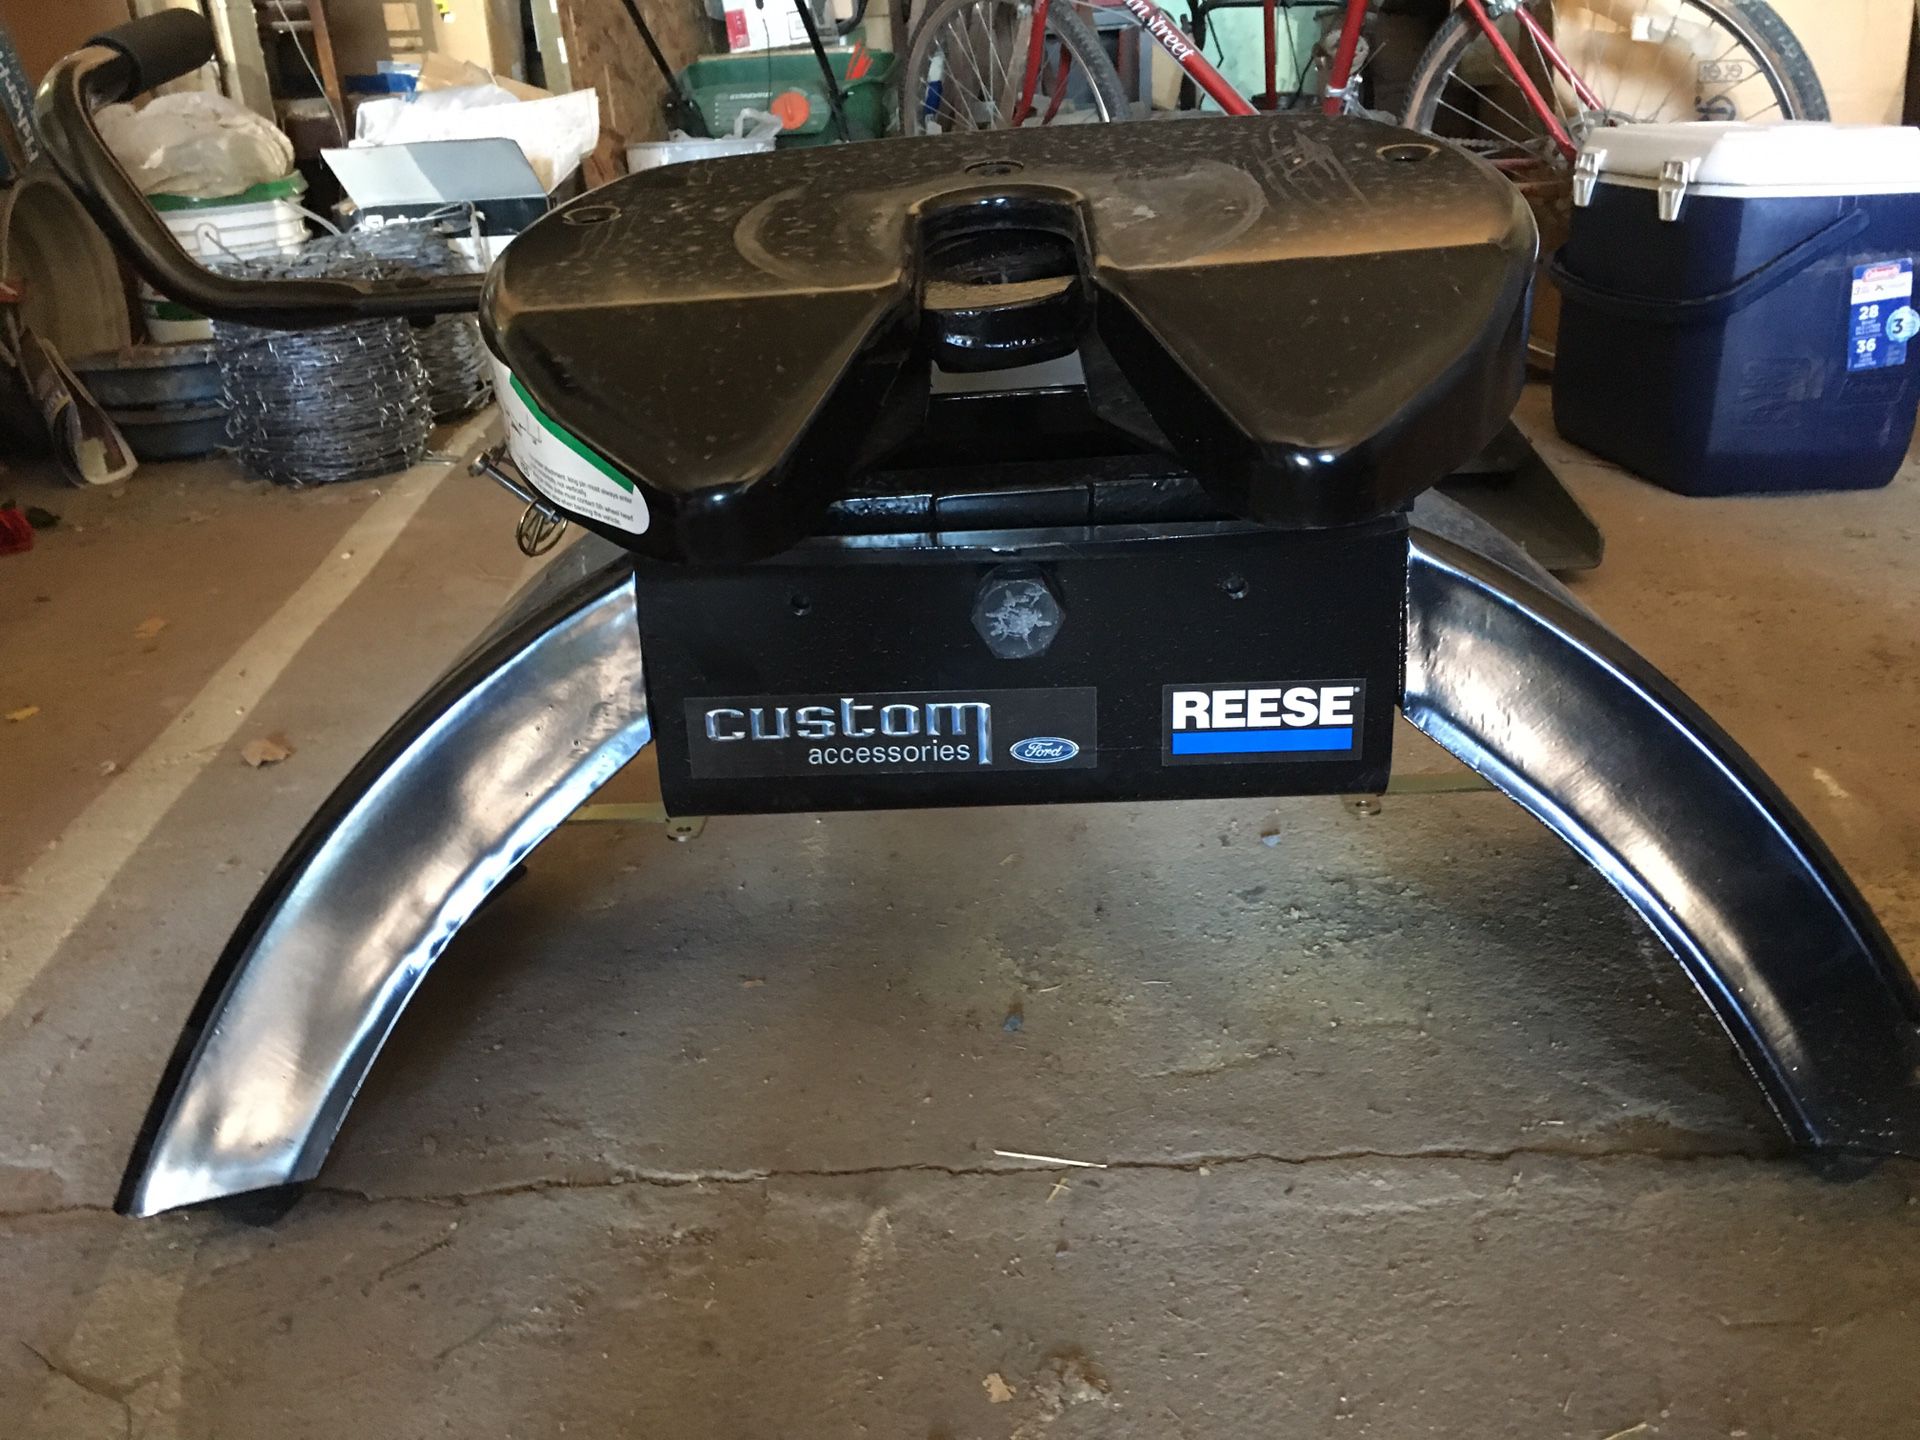 New Reese fifth wheel hitch for Ford Super Duty